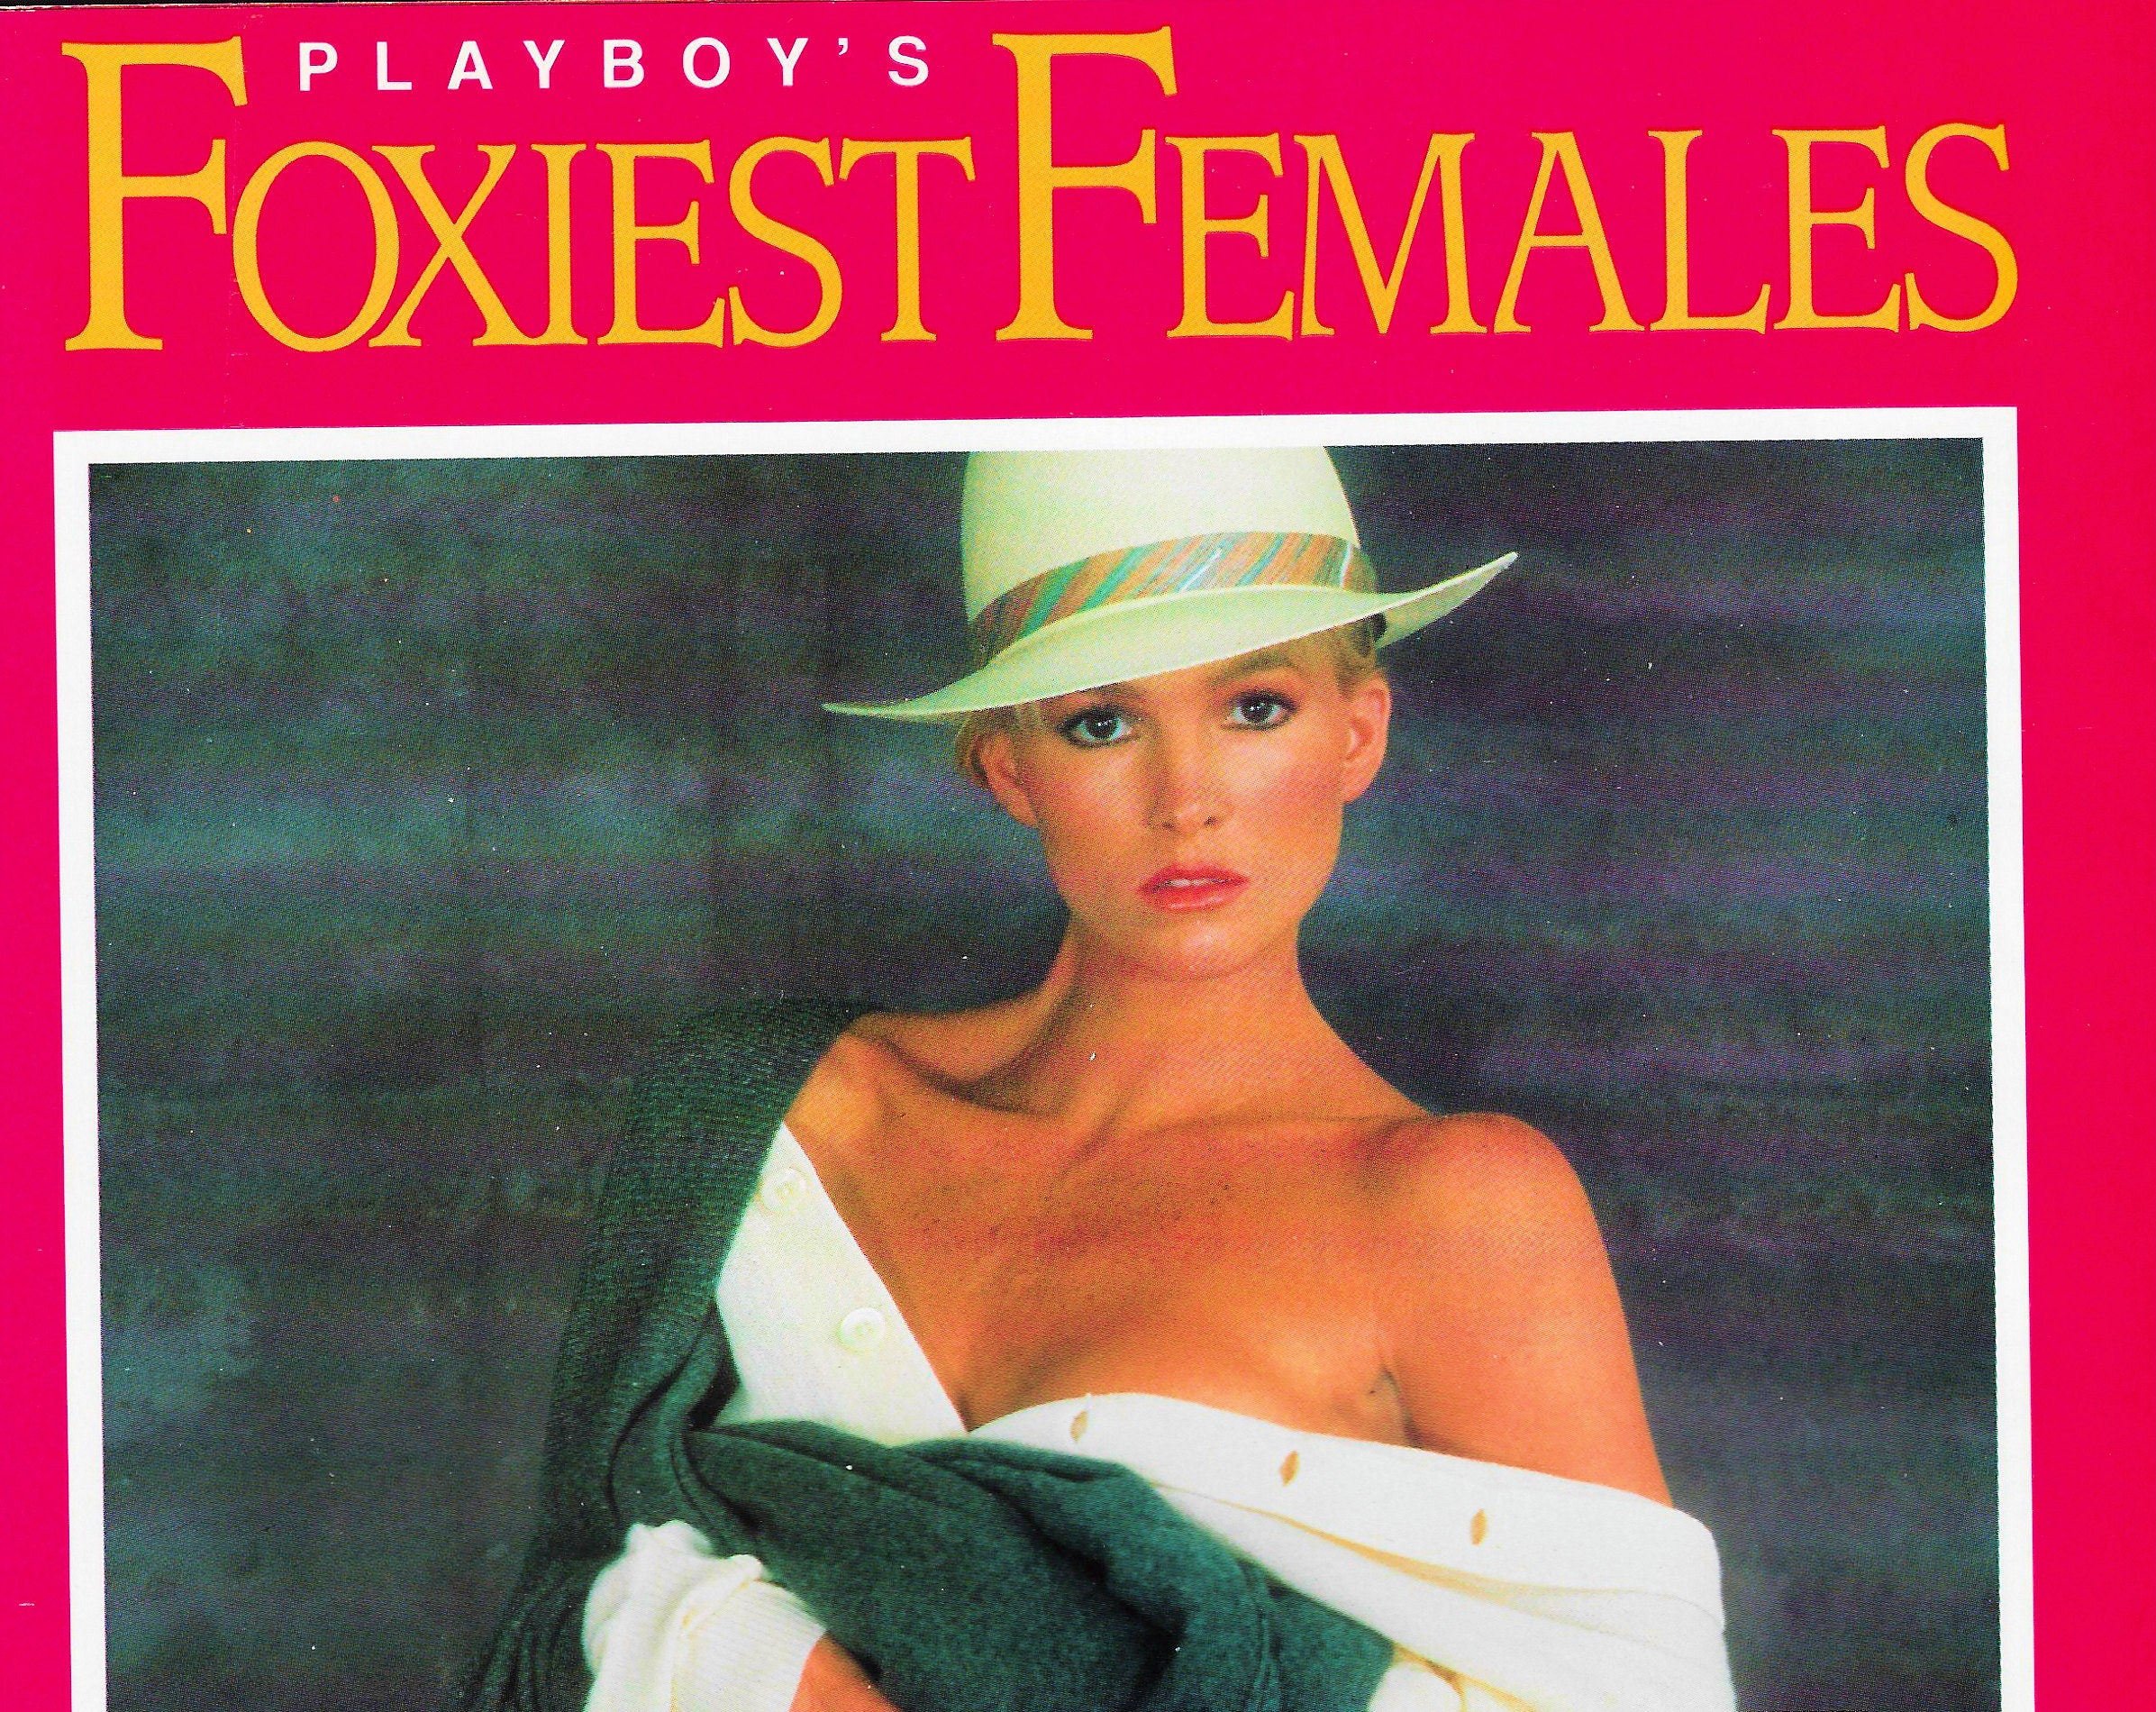 PLAYBOY’S FOXIEST FEMALES Supplement to Playboy 1991.